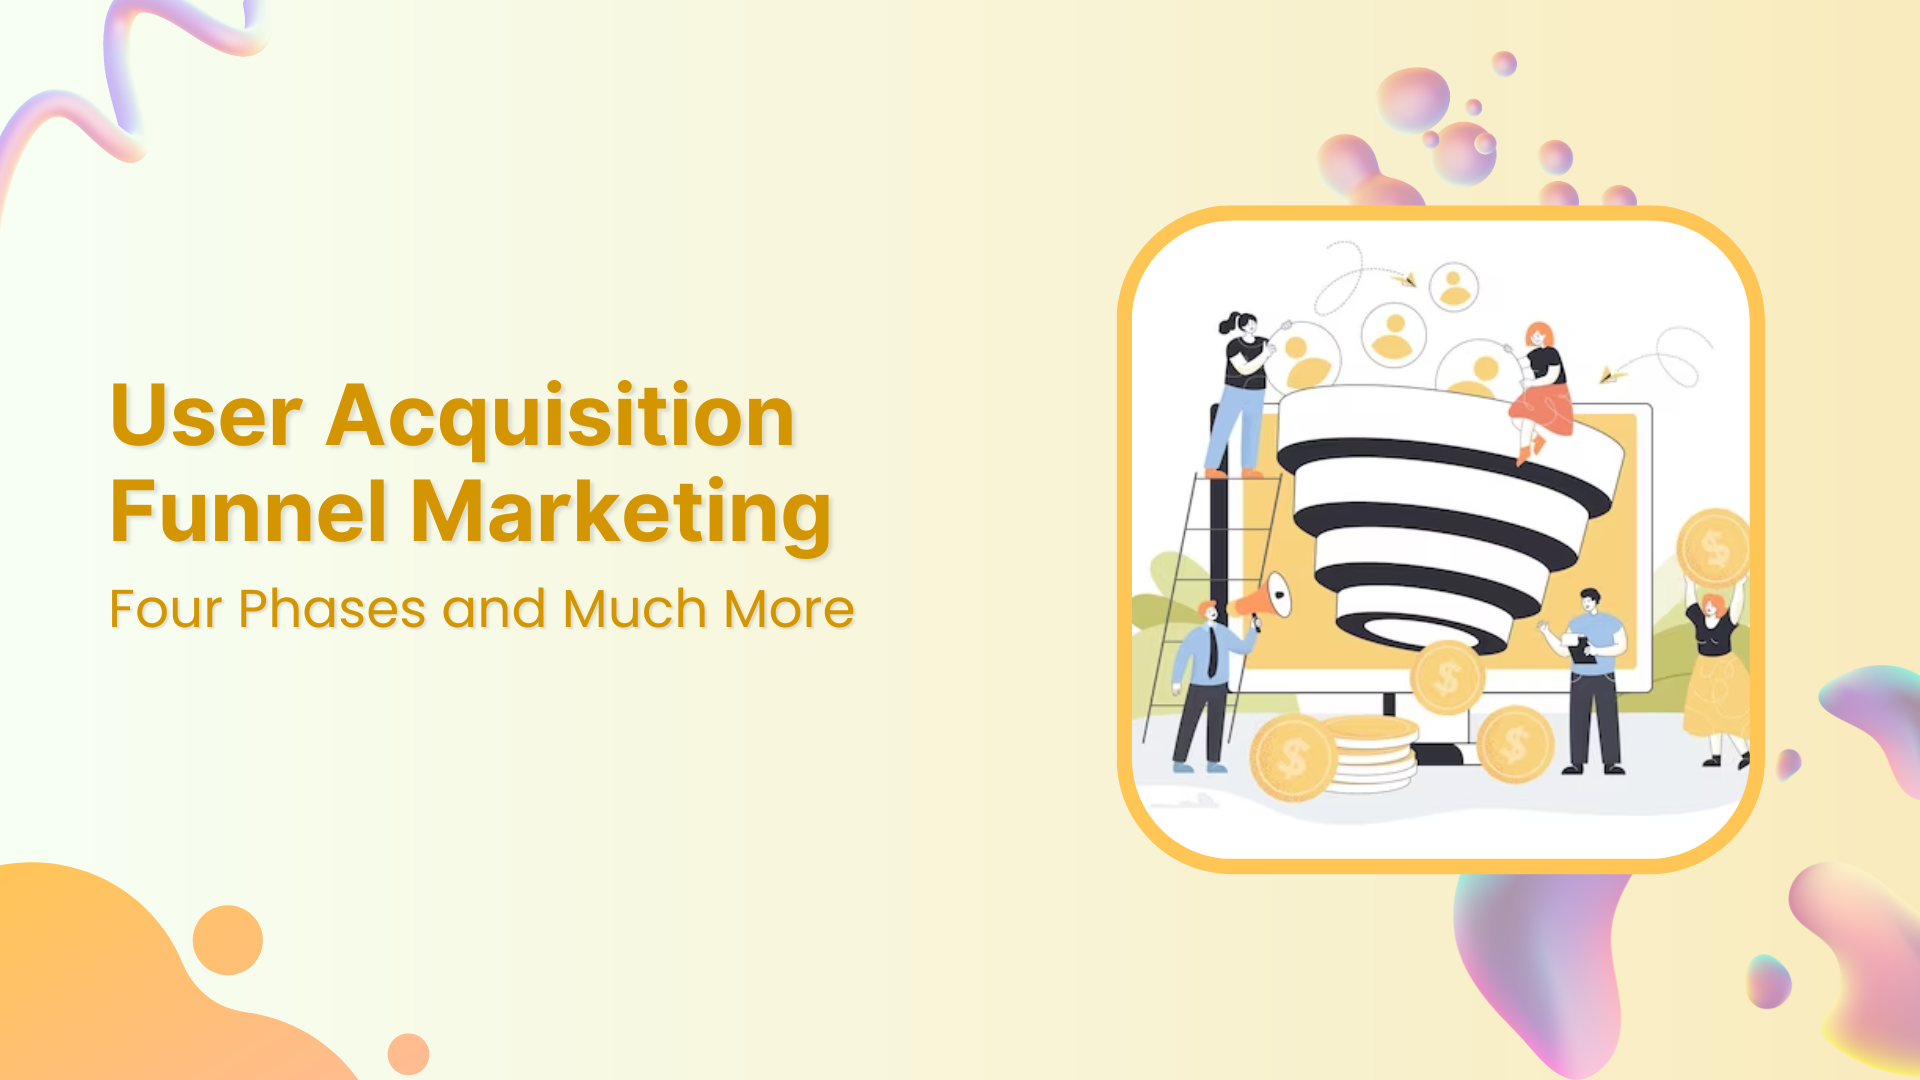 The 4 Phases of User Acquisition Funnel Marketing